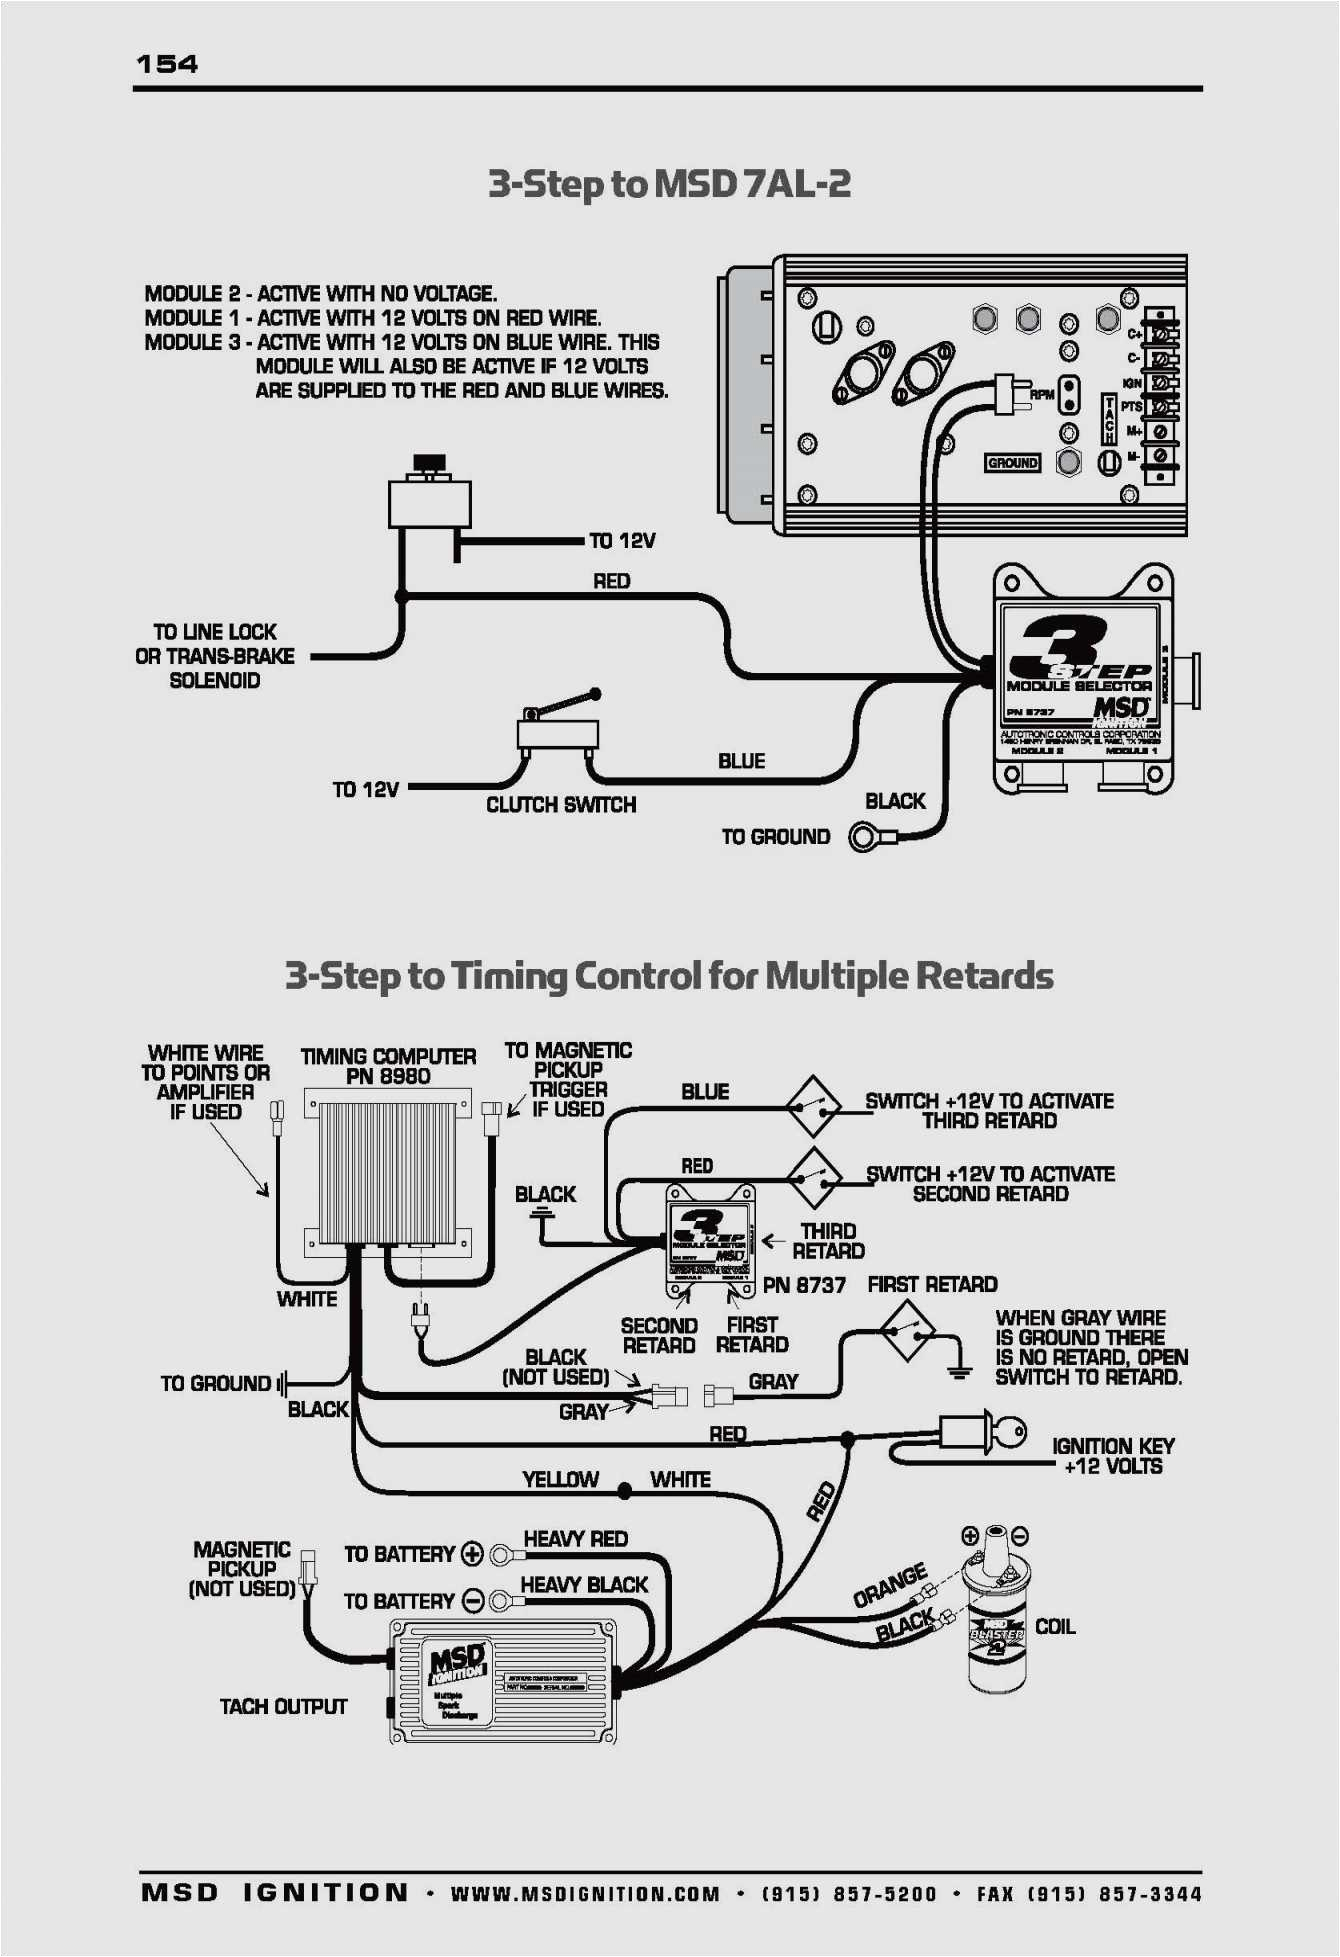 ignition switch wiring diagram chevy unique wiring diagram for rh citruscyclecenter 6 pole ignition switch diagram 6 pole ignition switch diagram